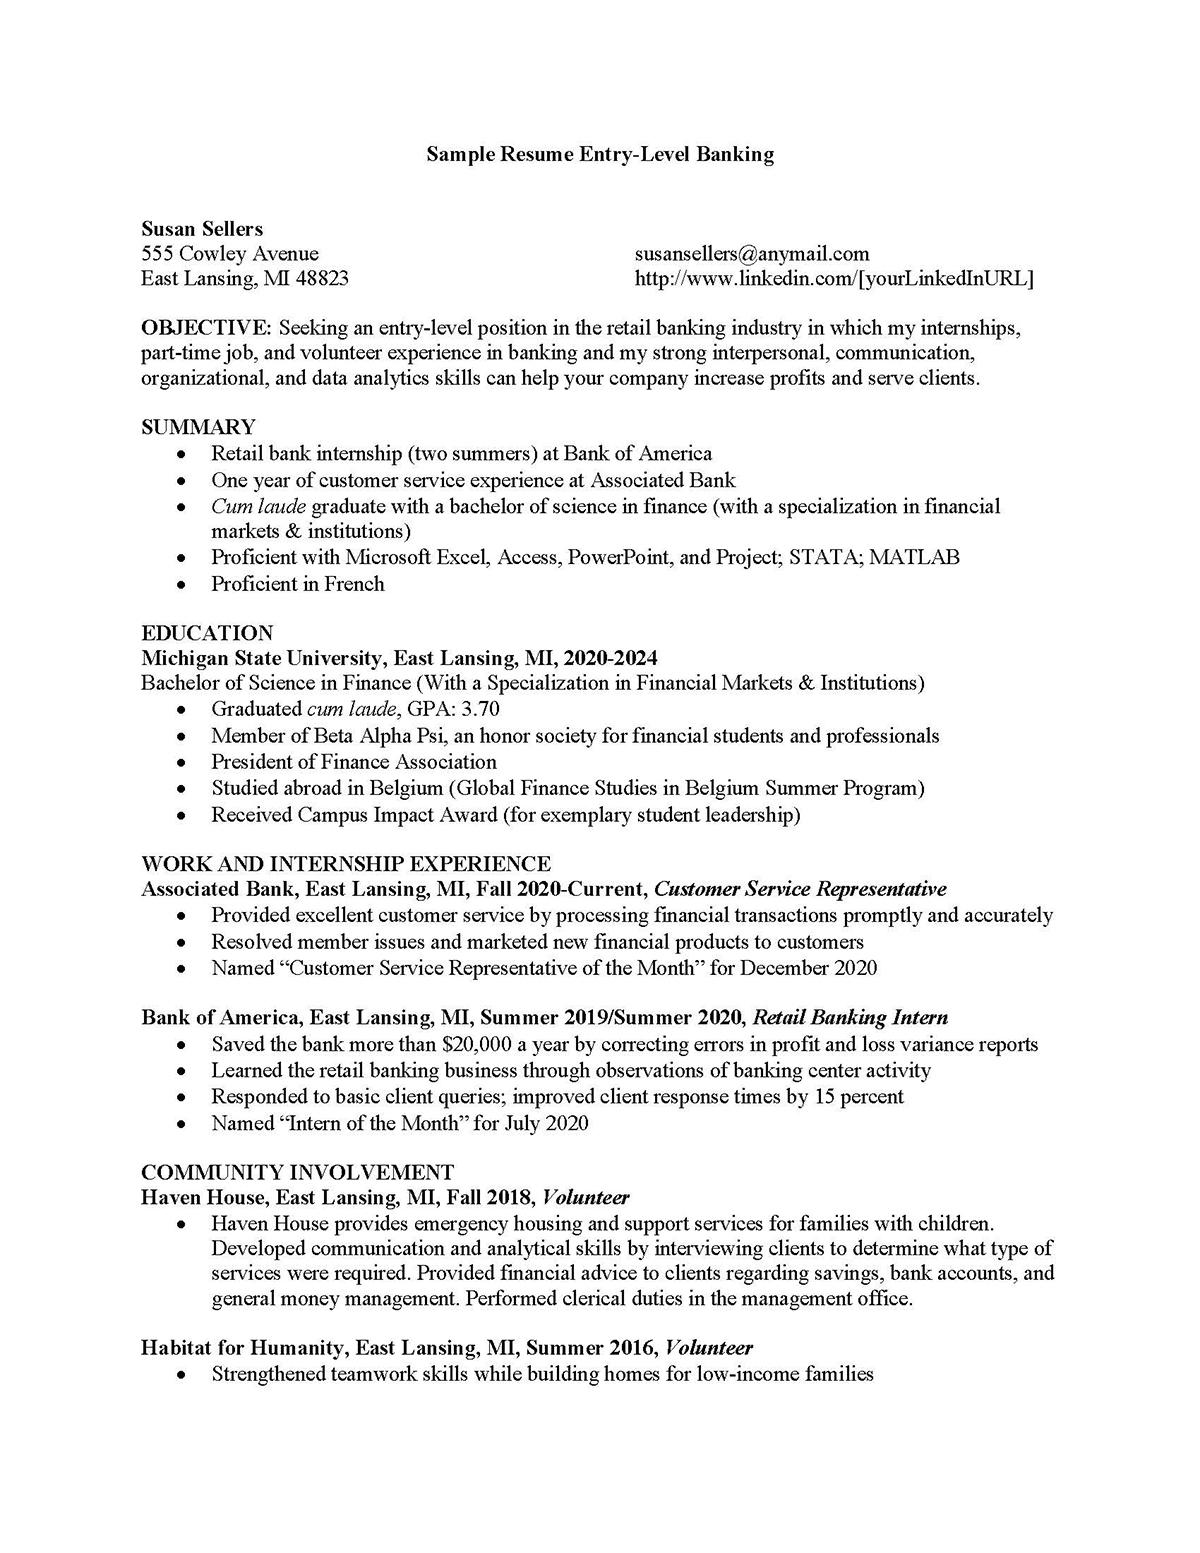 Sample resume: Commercial Banking, Entry Level, Functional